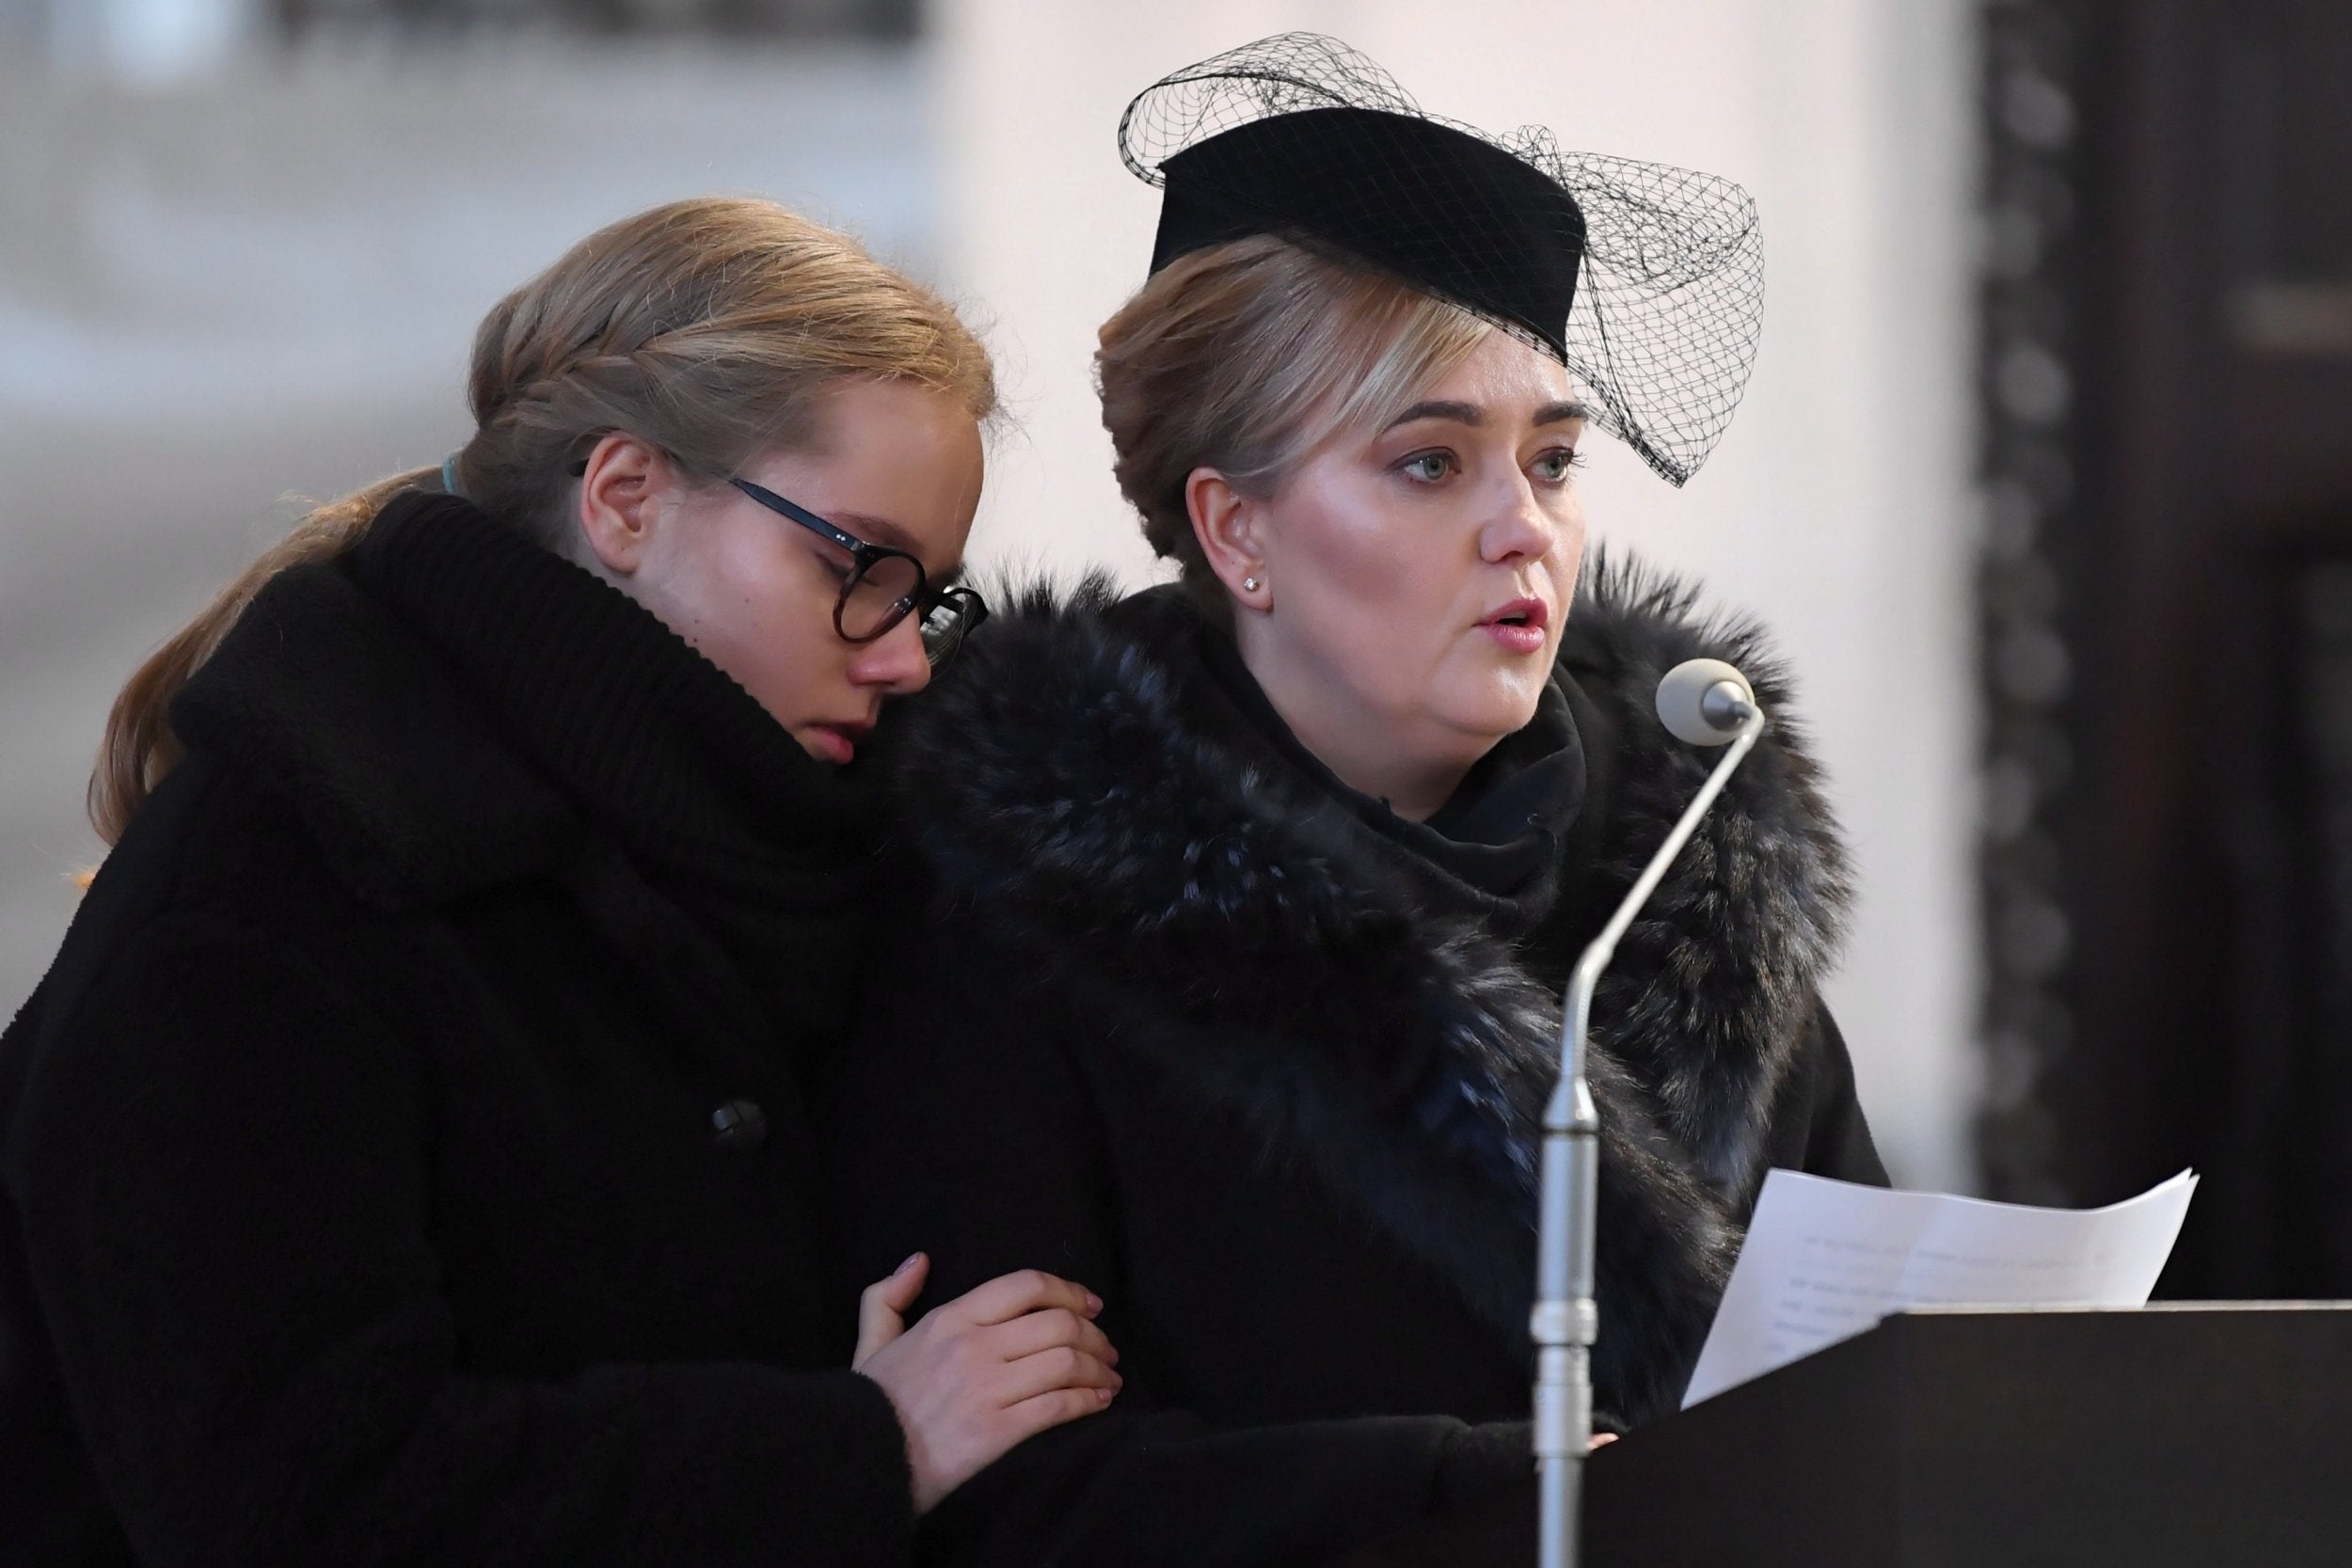 Gdansk archbishop calls for unity as thousands gather for funeral of murdered mayor Pawel Adamowicz